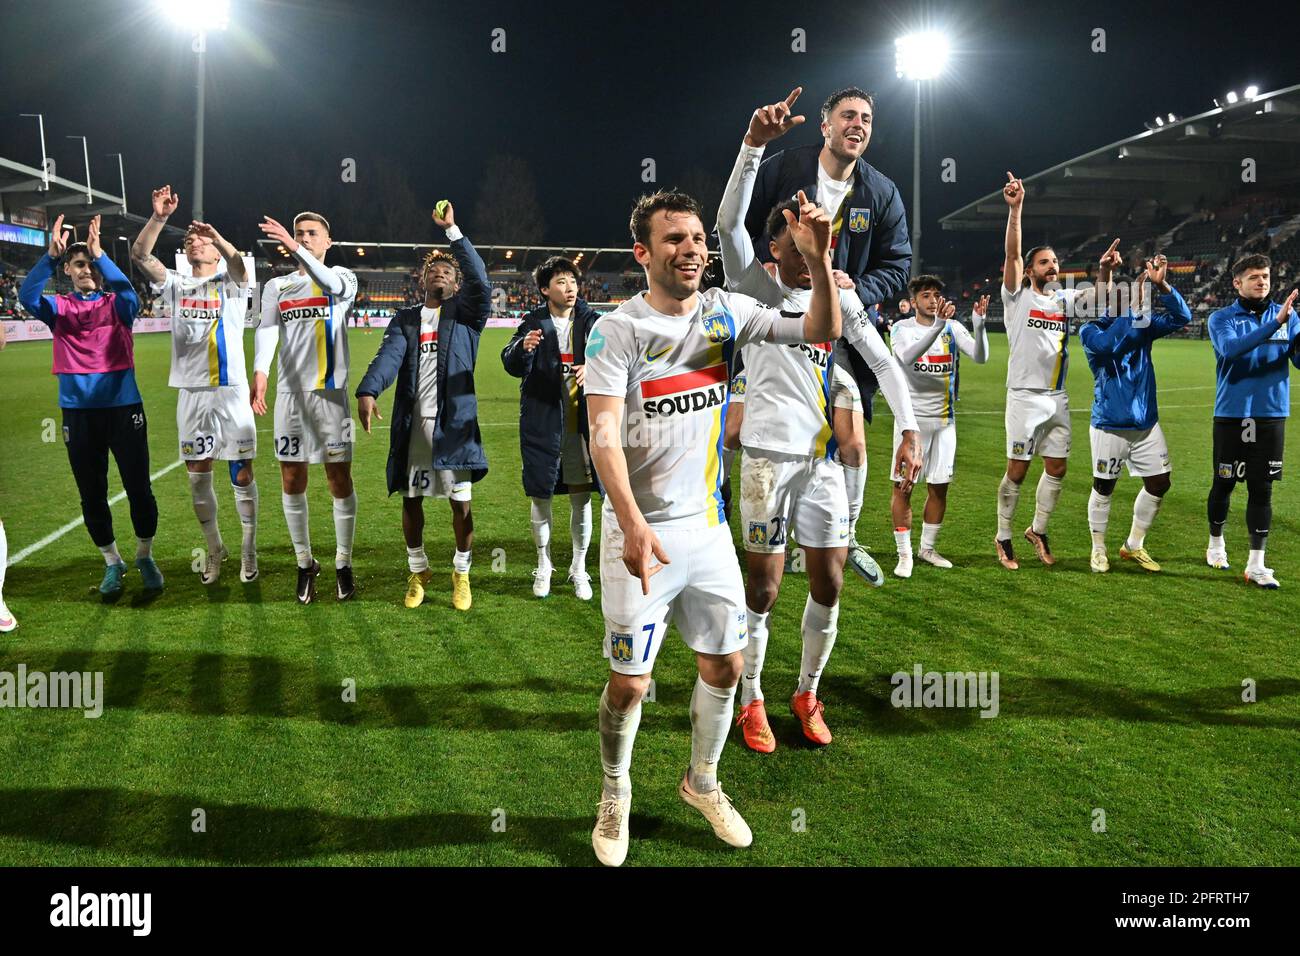 Westerlo's players, Westerlo's Lukas Van Eeno and Westerlo's Bryan Reynolds  celebrate after winning a soccer match between KV Oostende and KVC Westerlo,  Saturday 18 March 2023 in Oostende, on day 30 of